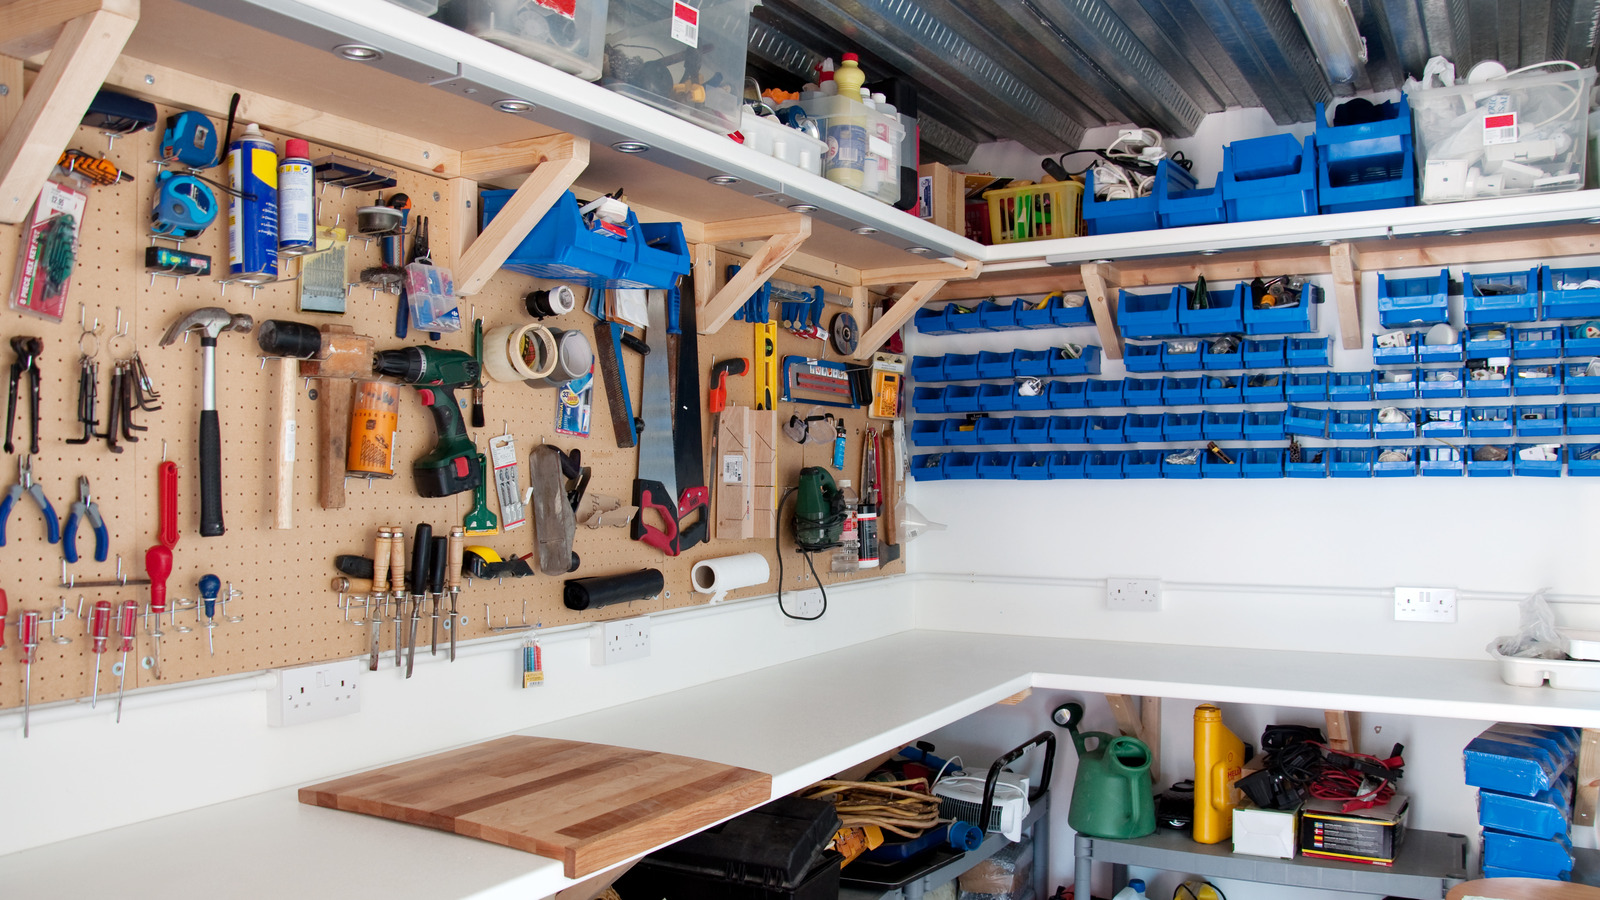 6 Garage Shelving Ideas to Help You Store More